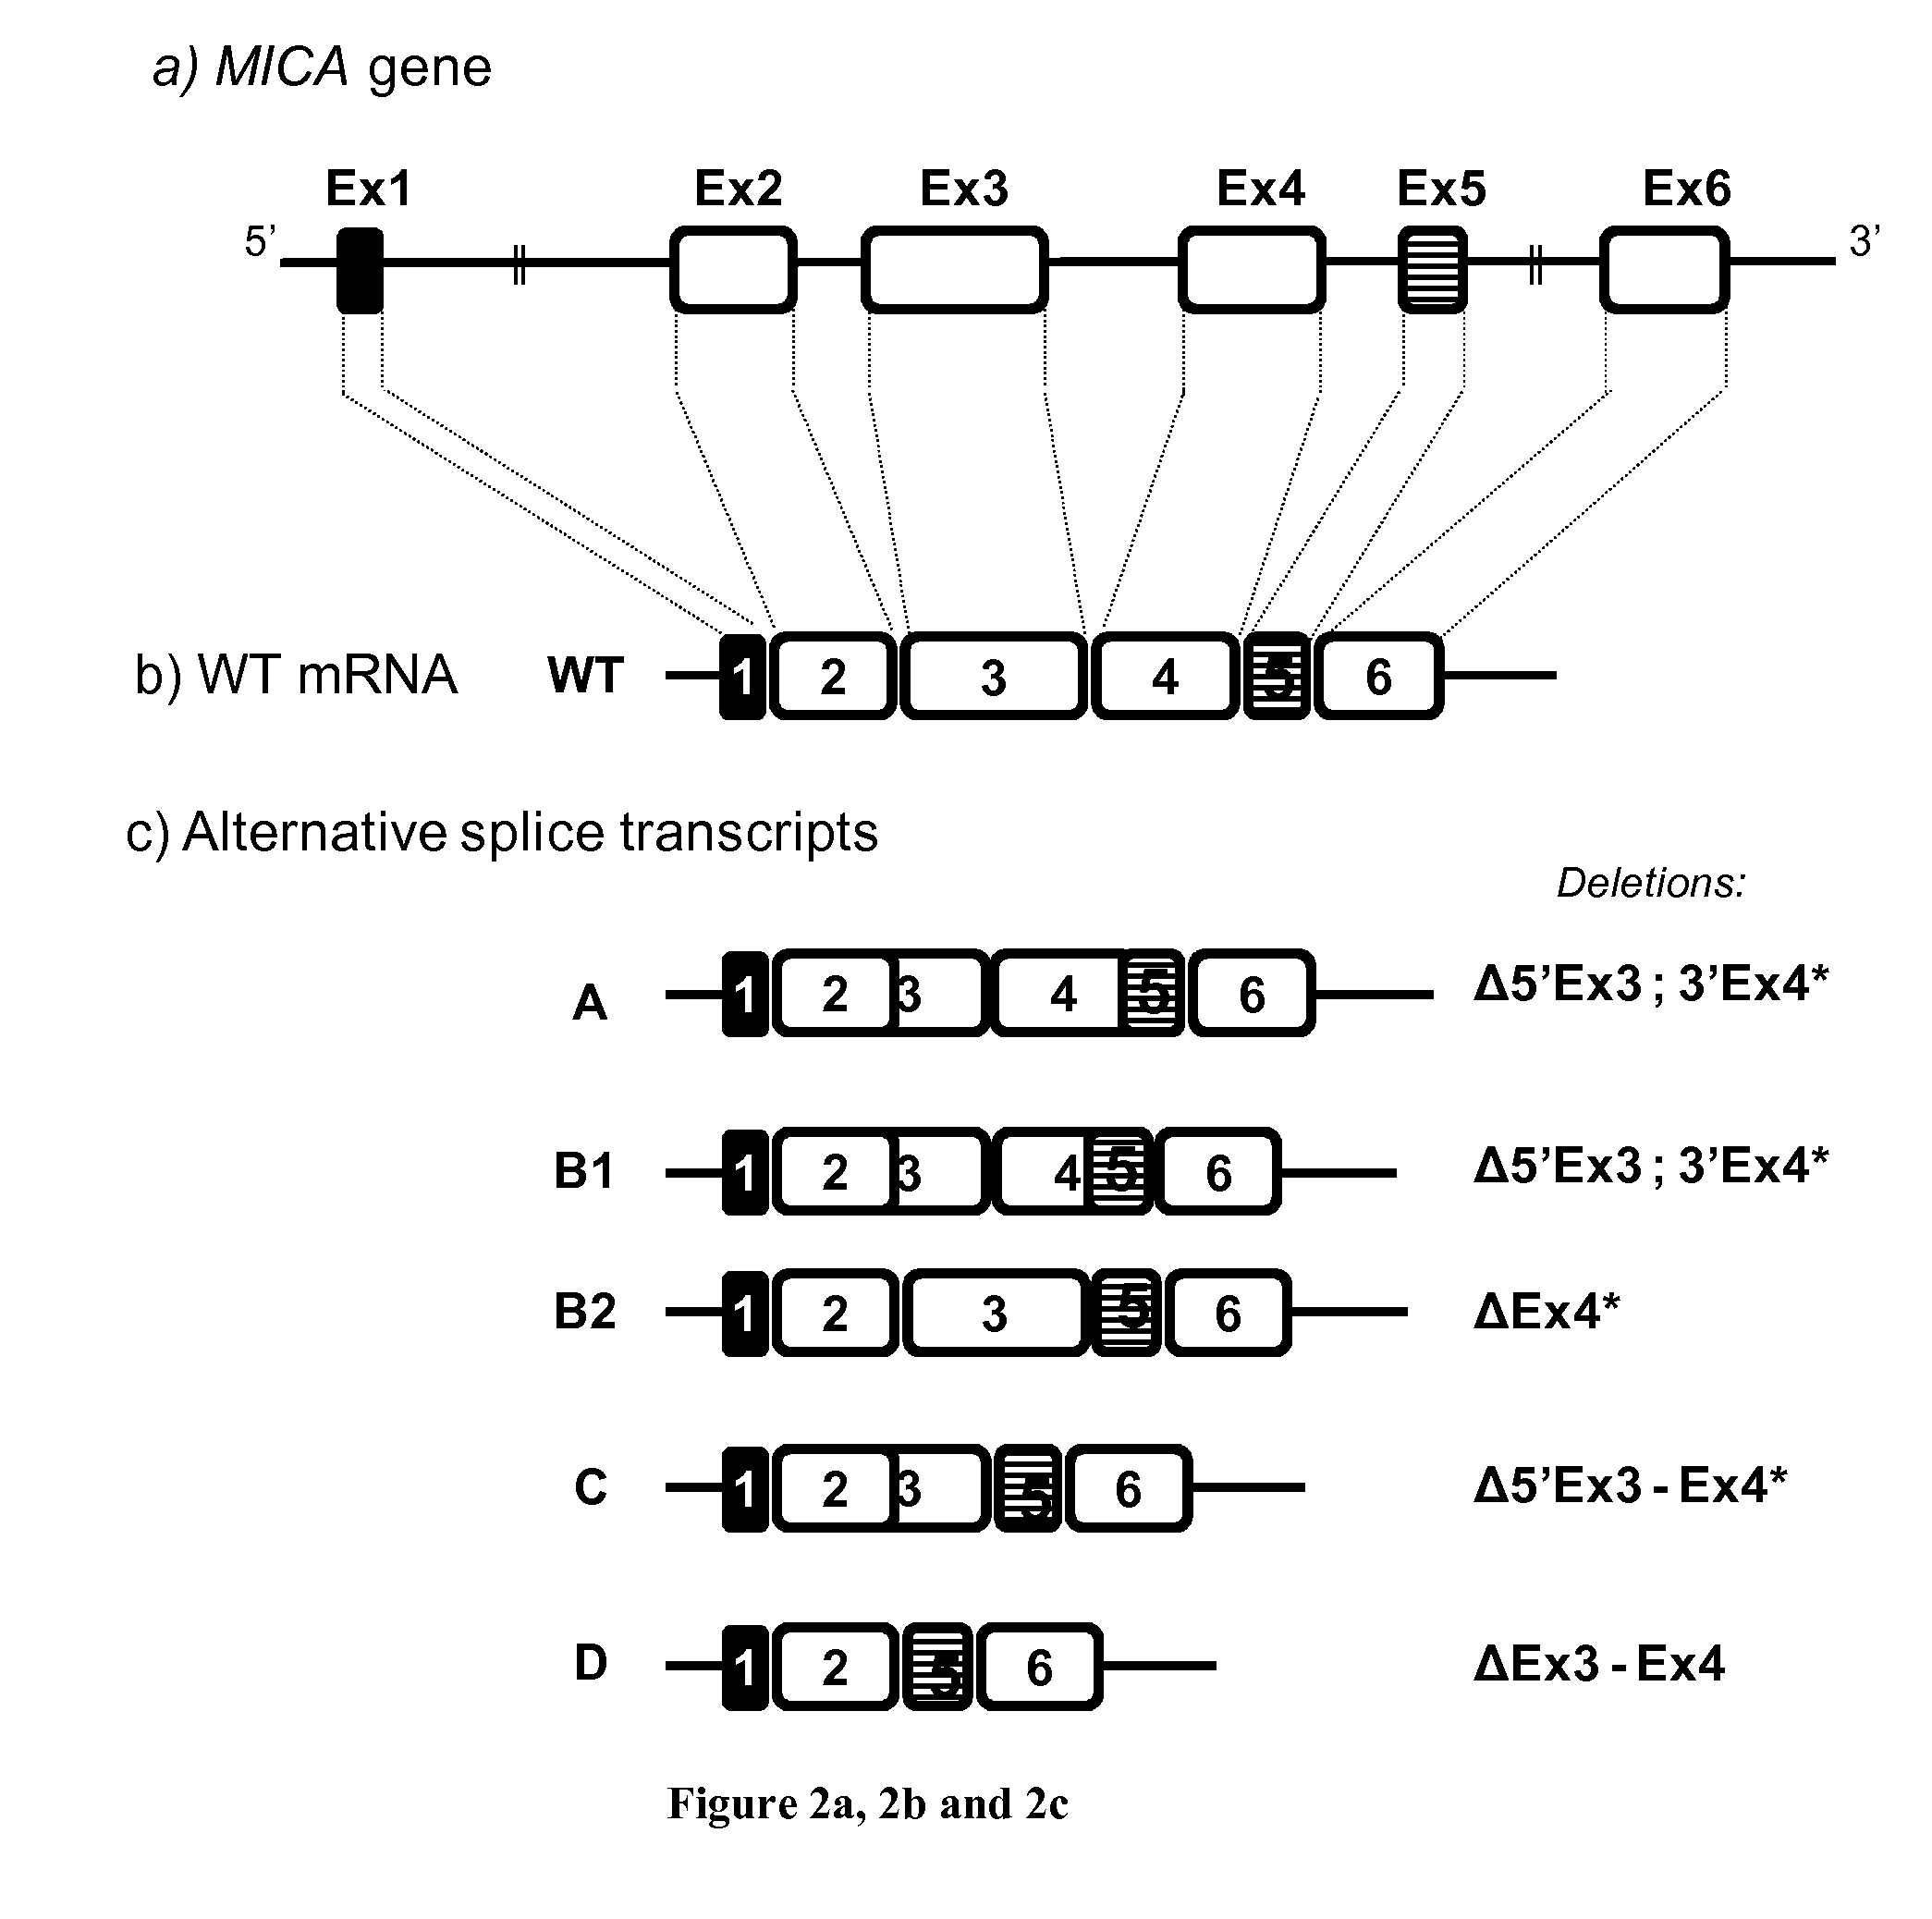 Novel alternative splice transcripts for mhc class i related chain alpha (MICA) and uses thereof